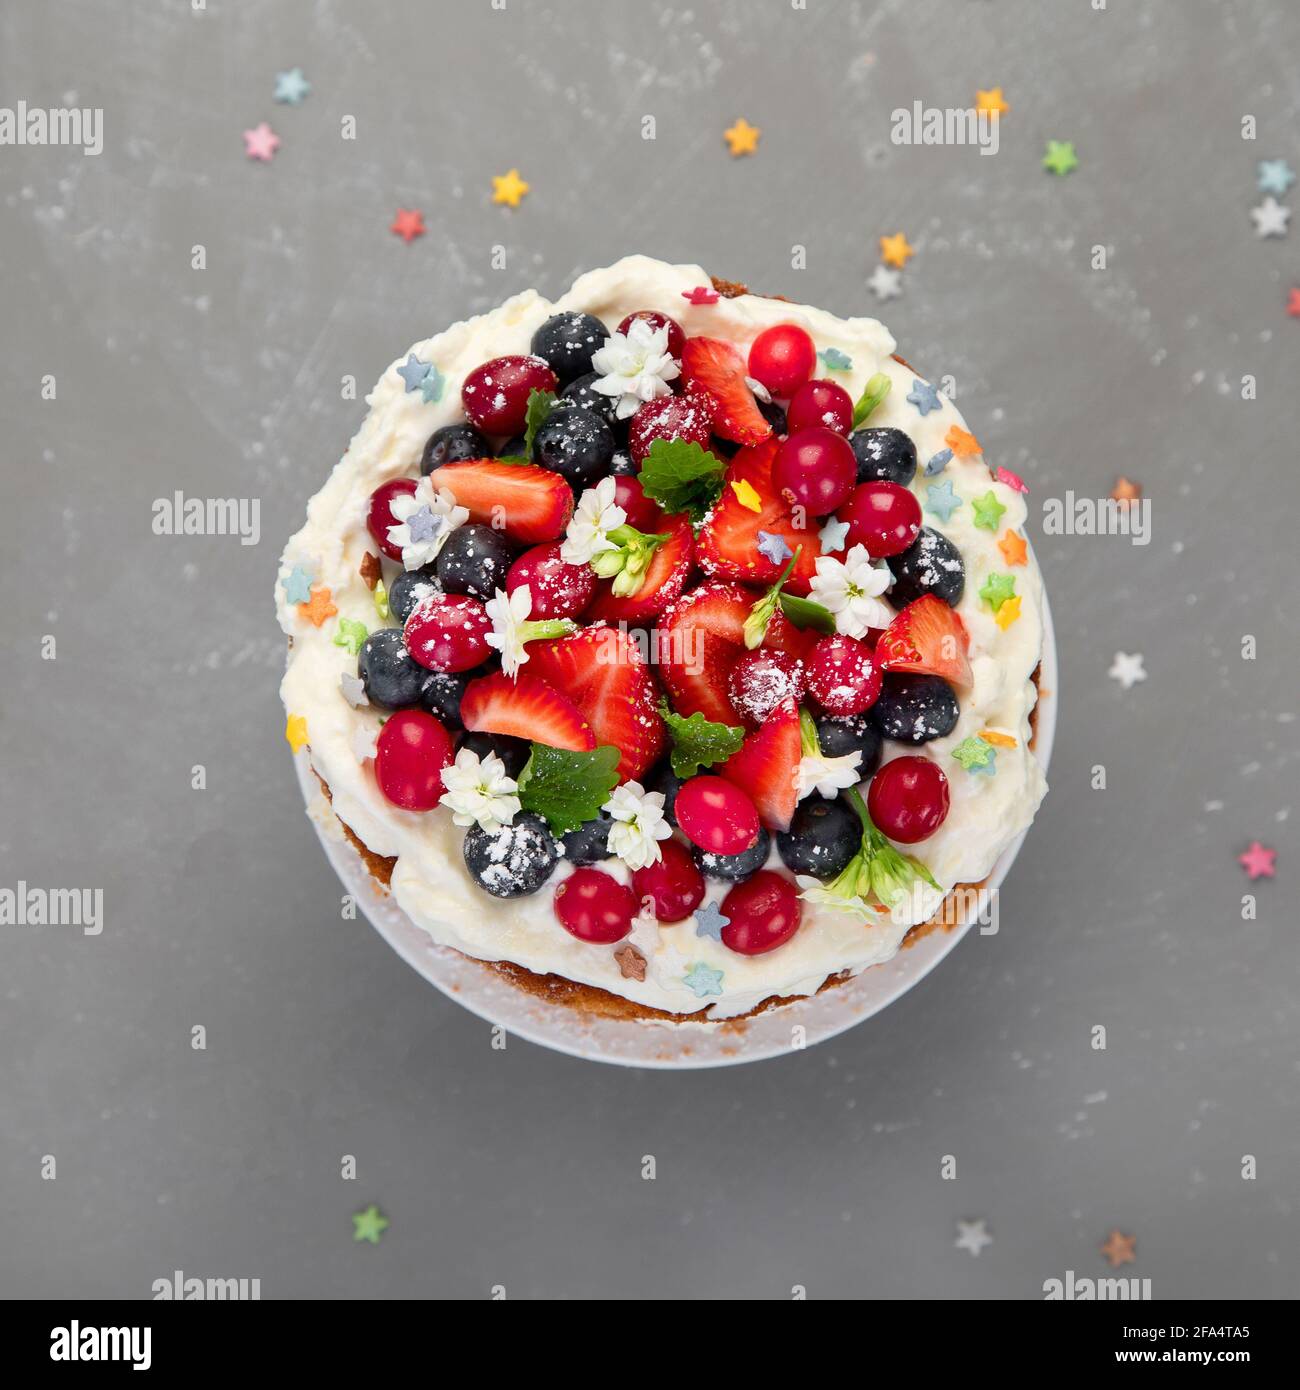 Delicious homemade cake with fresh berries and mascarpone cream on gray background. Top view, copy space Stock Photo